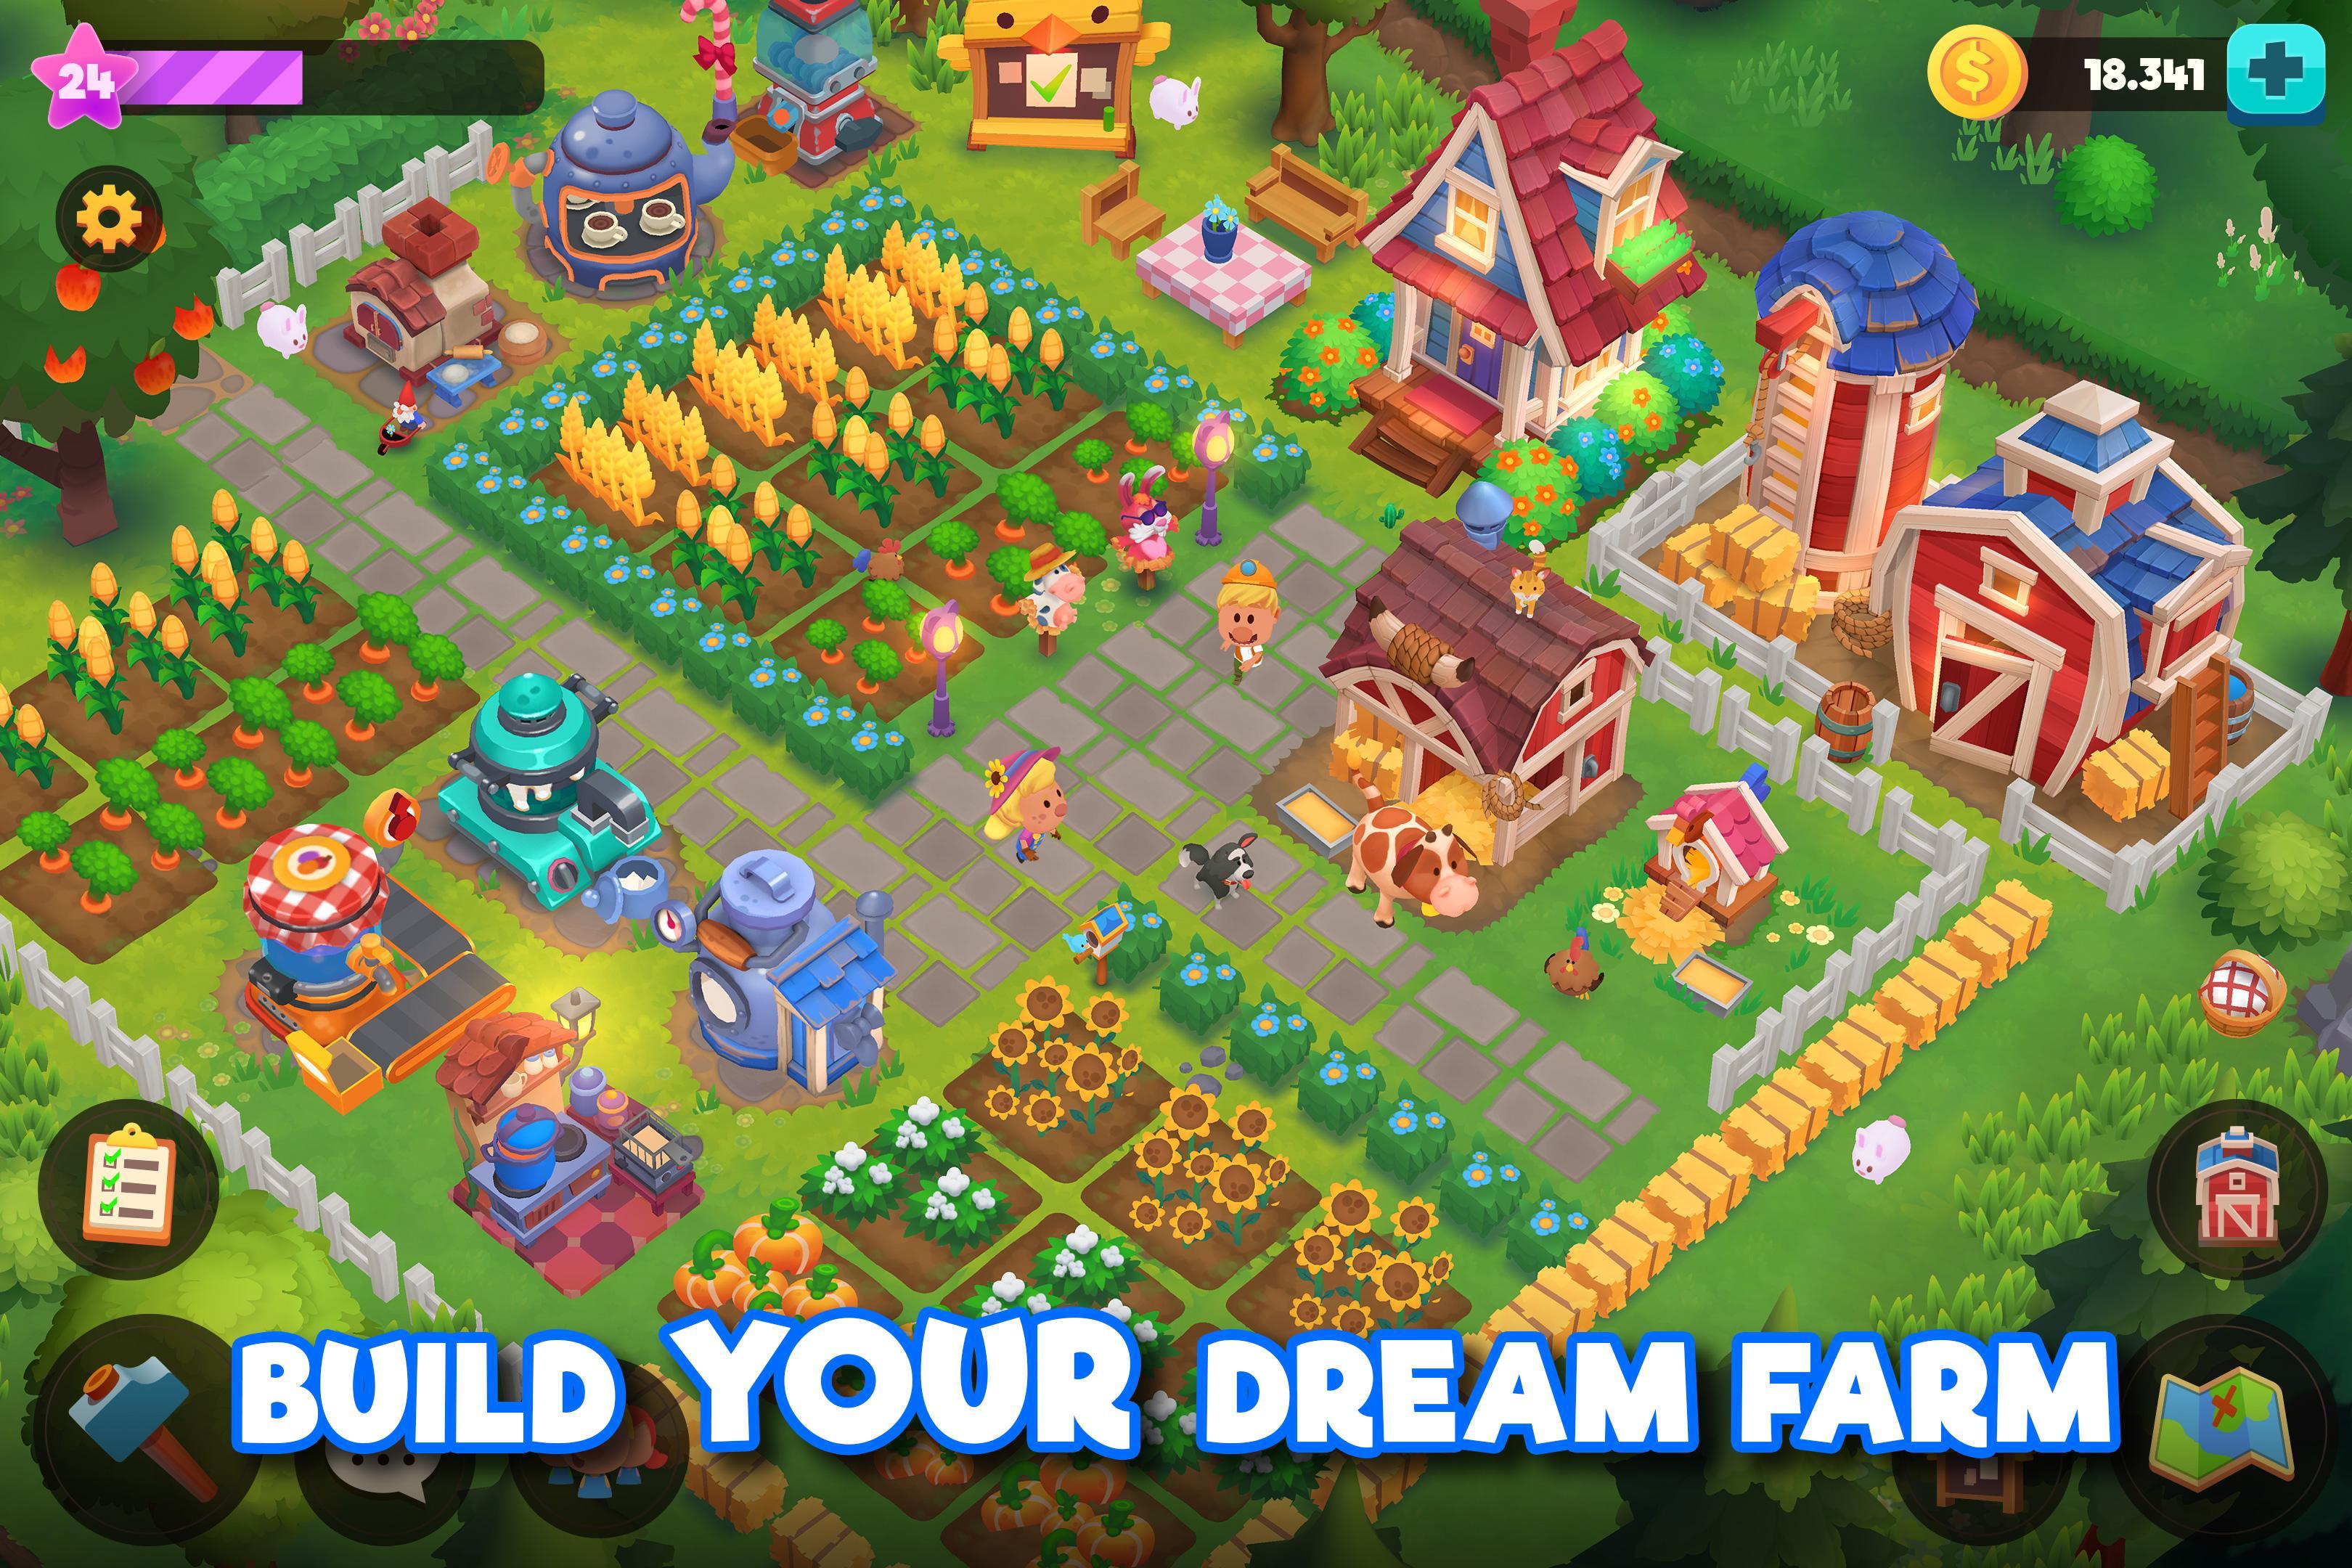 Farm craft 2 game download for android lindavacations